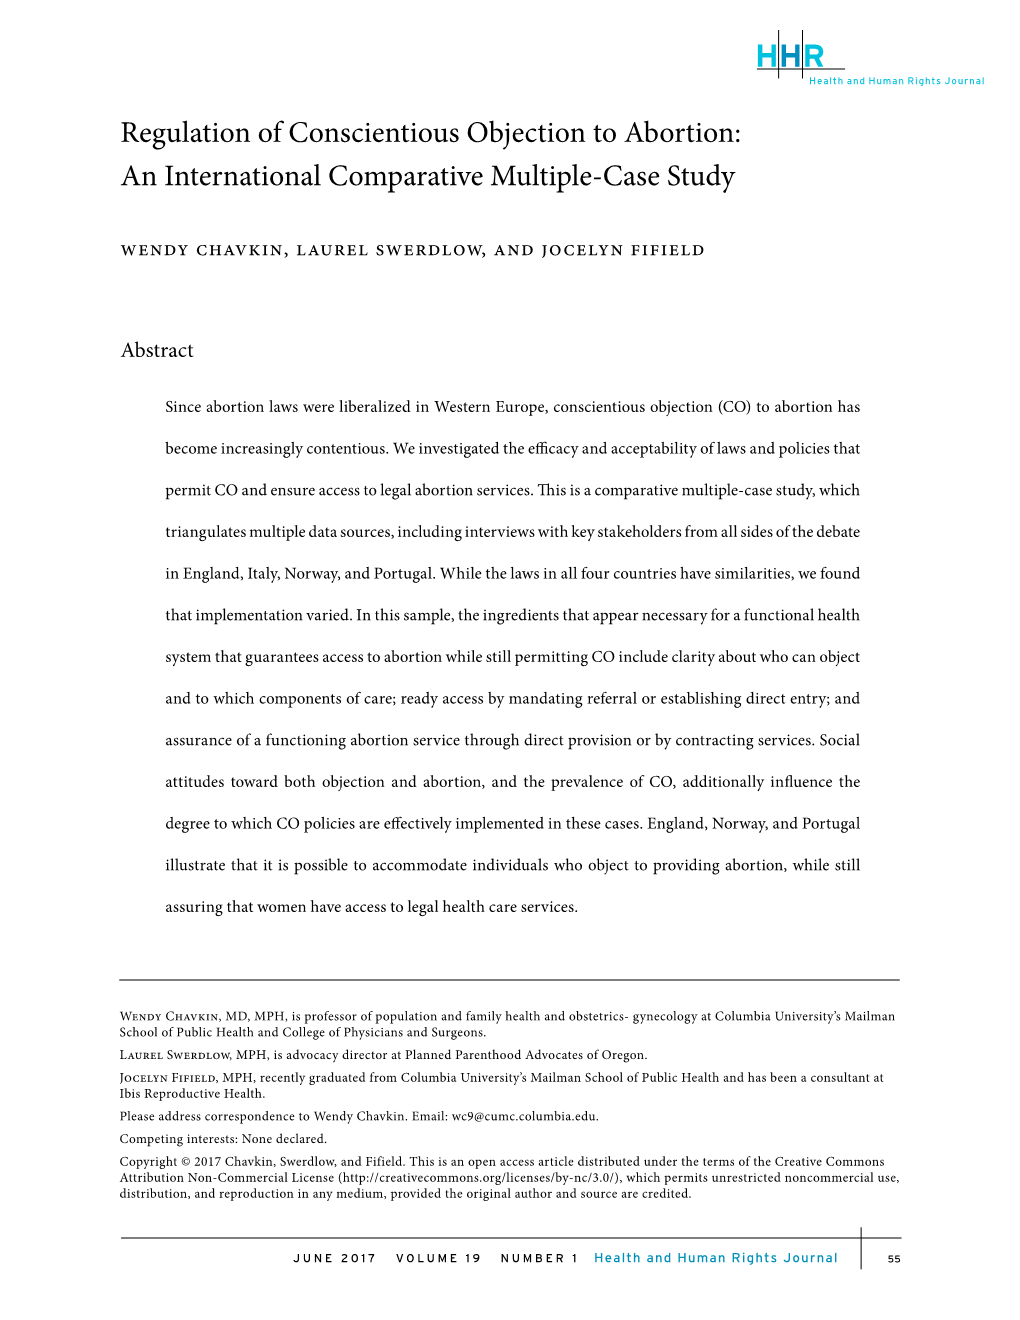 Regulation of Conscientious Objection to Abortion: an International